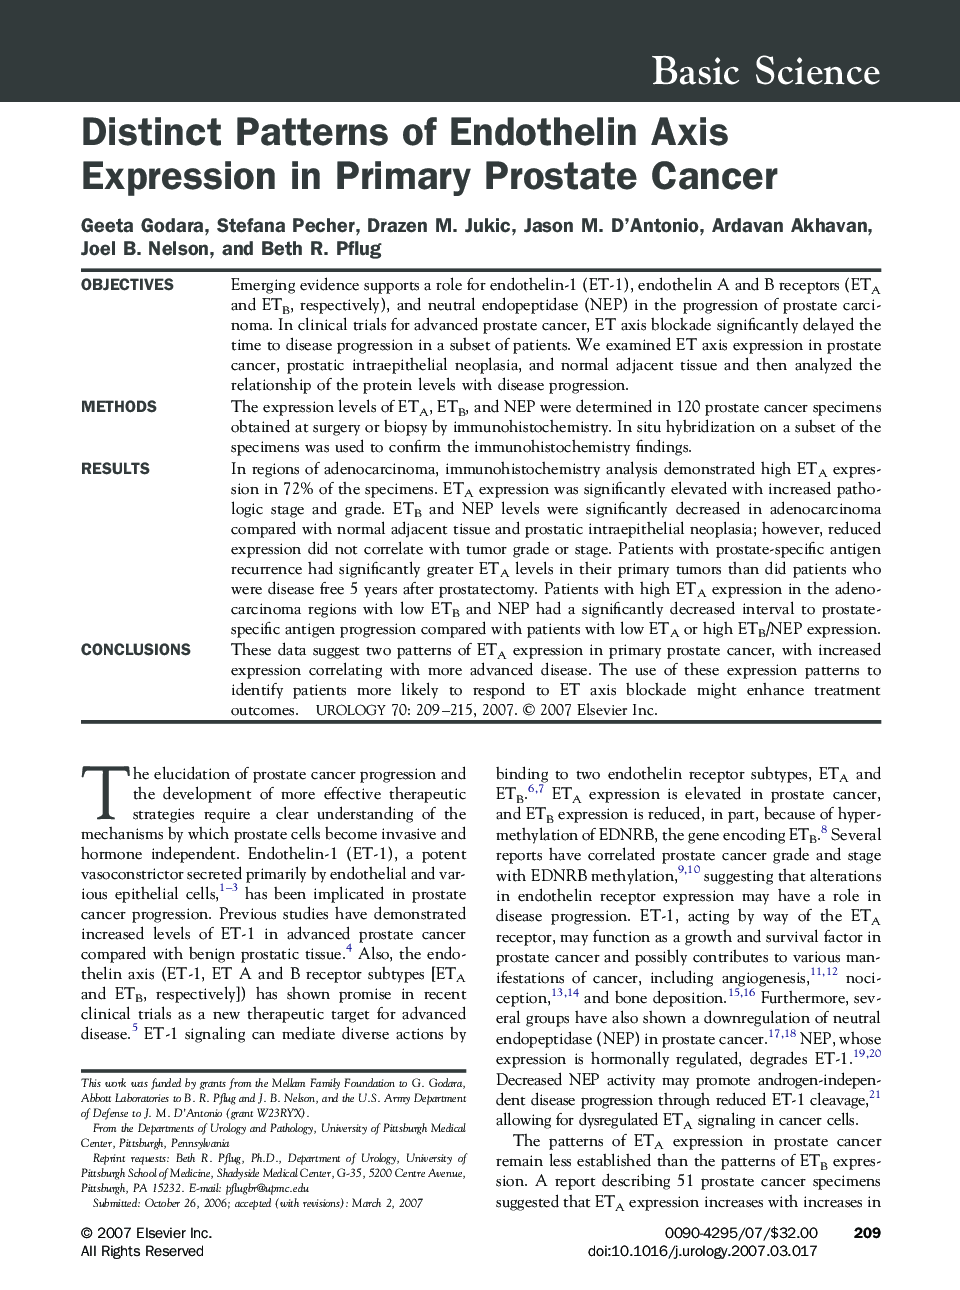 Distinct Patterns of Endothelin Axis Expression in Primary Prostate Cancer